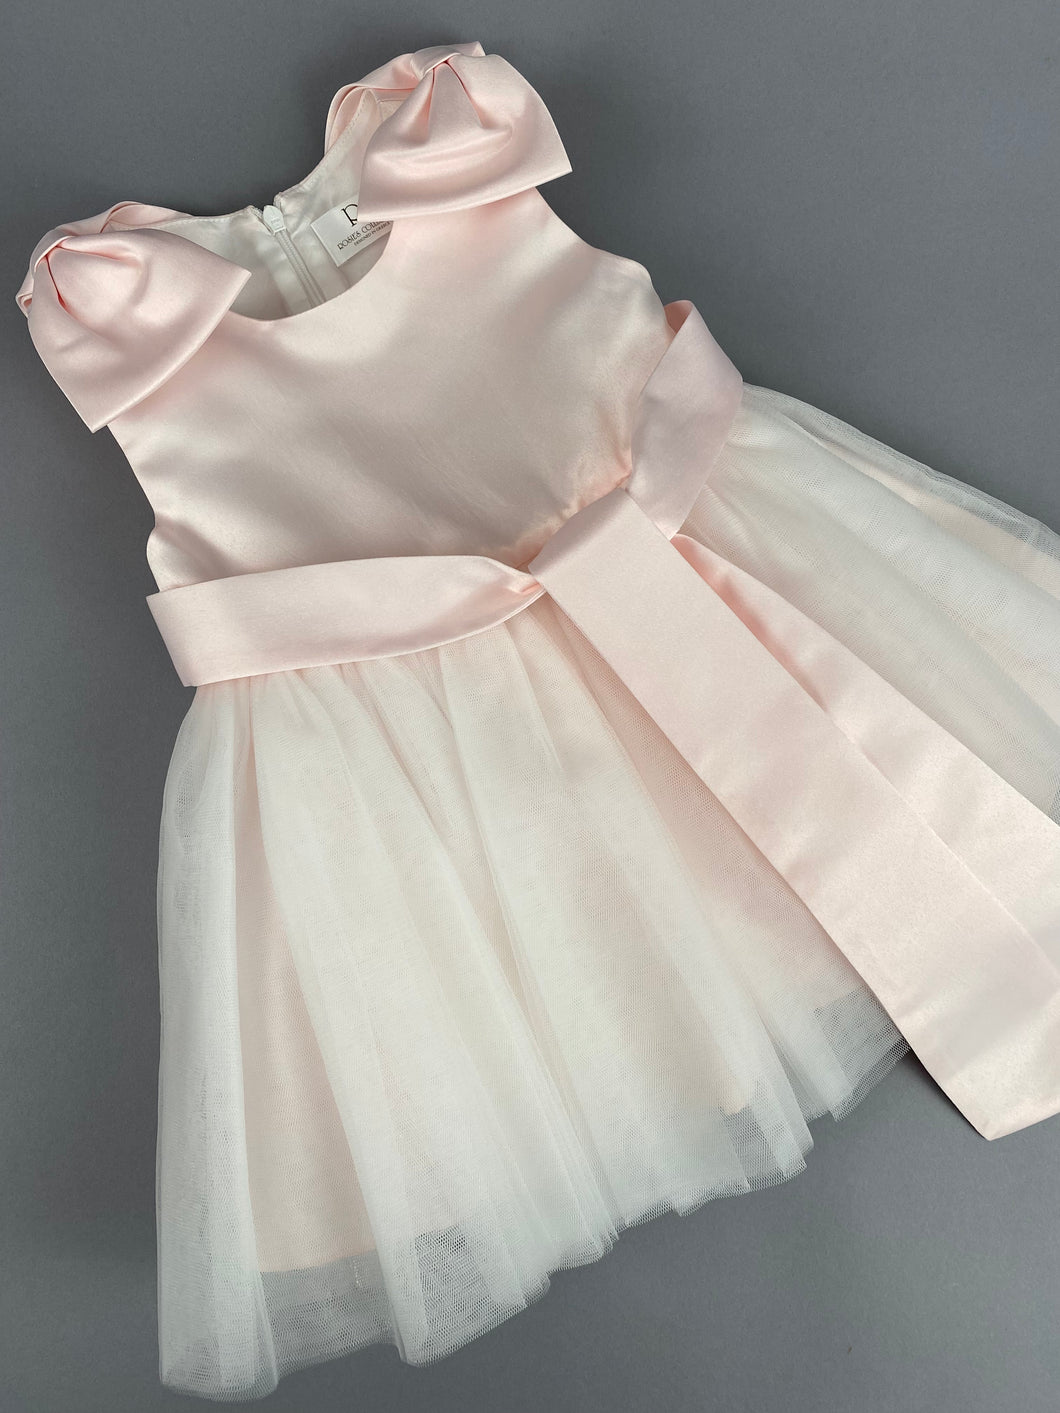 Dress 101 Girls Baptismal Christening Sleeveless Soft Pink Dress. Designed Exclusively for Rosies Collections